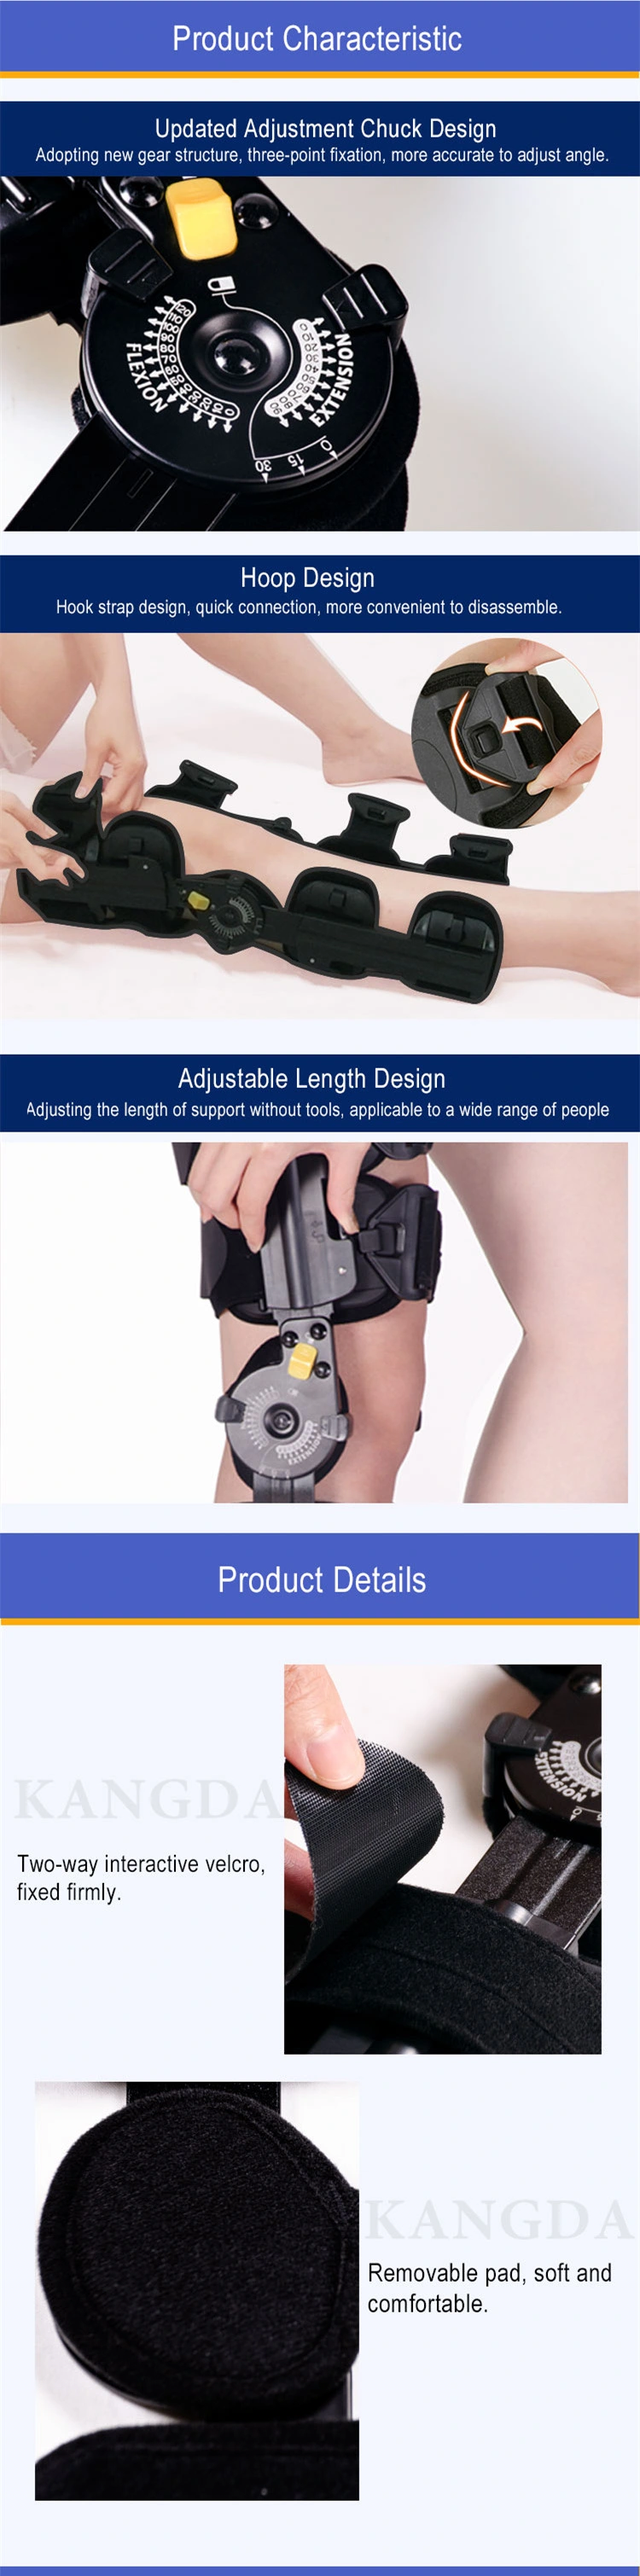 Factory Price Universal Angle Adjustable ROM Knee Brace for Correction of Knee Contracture